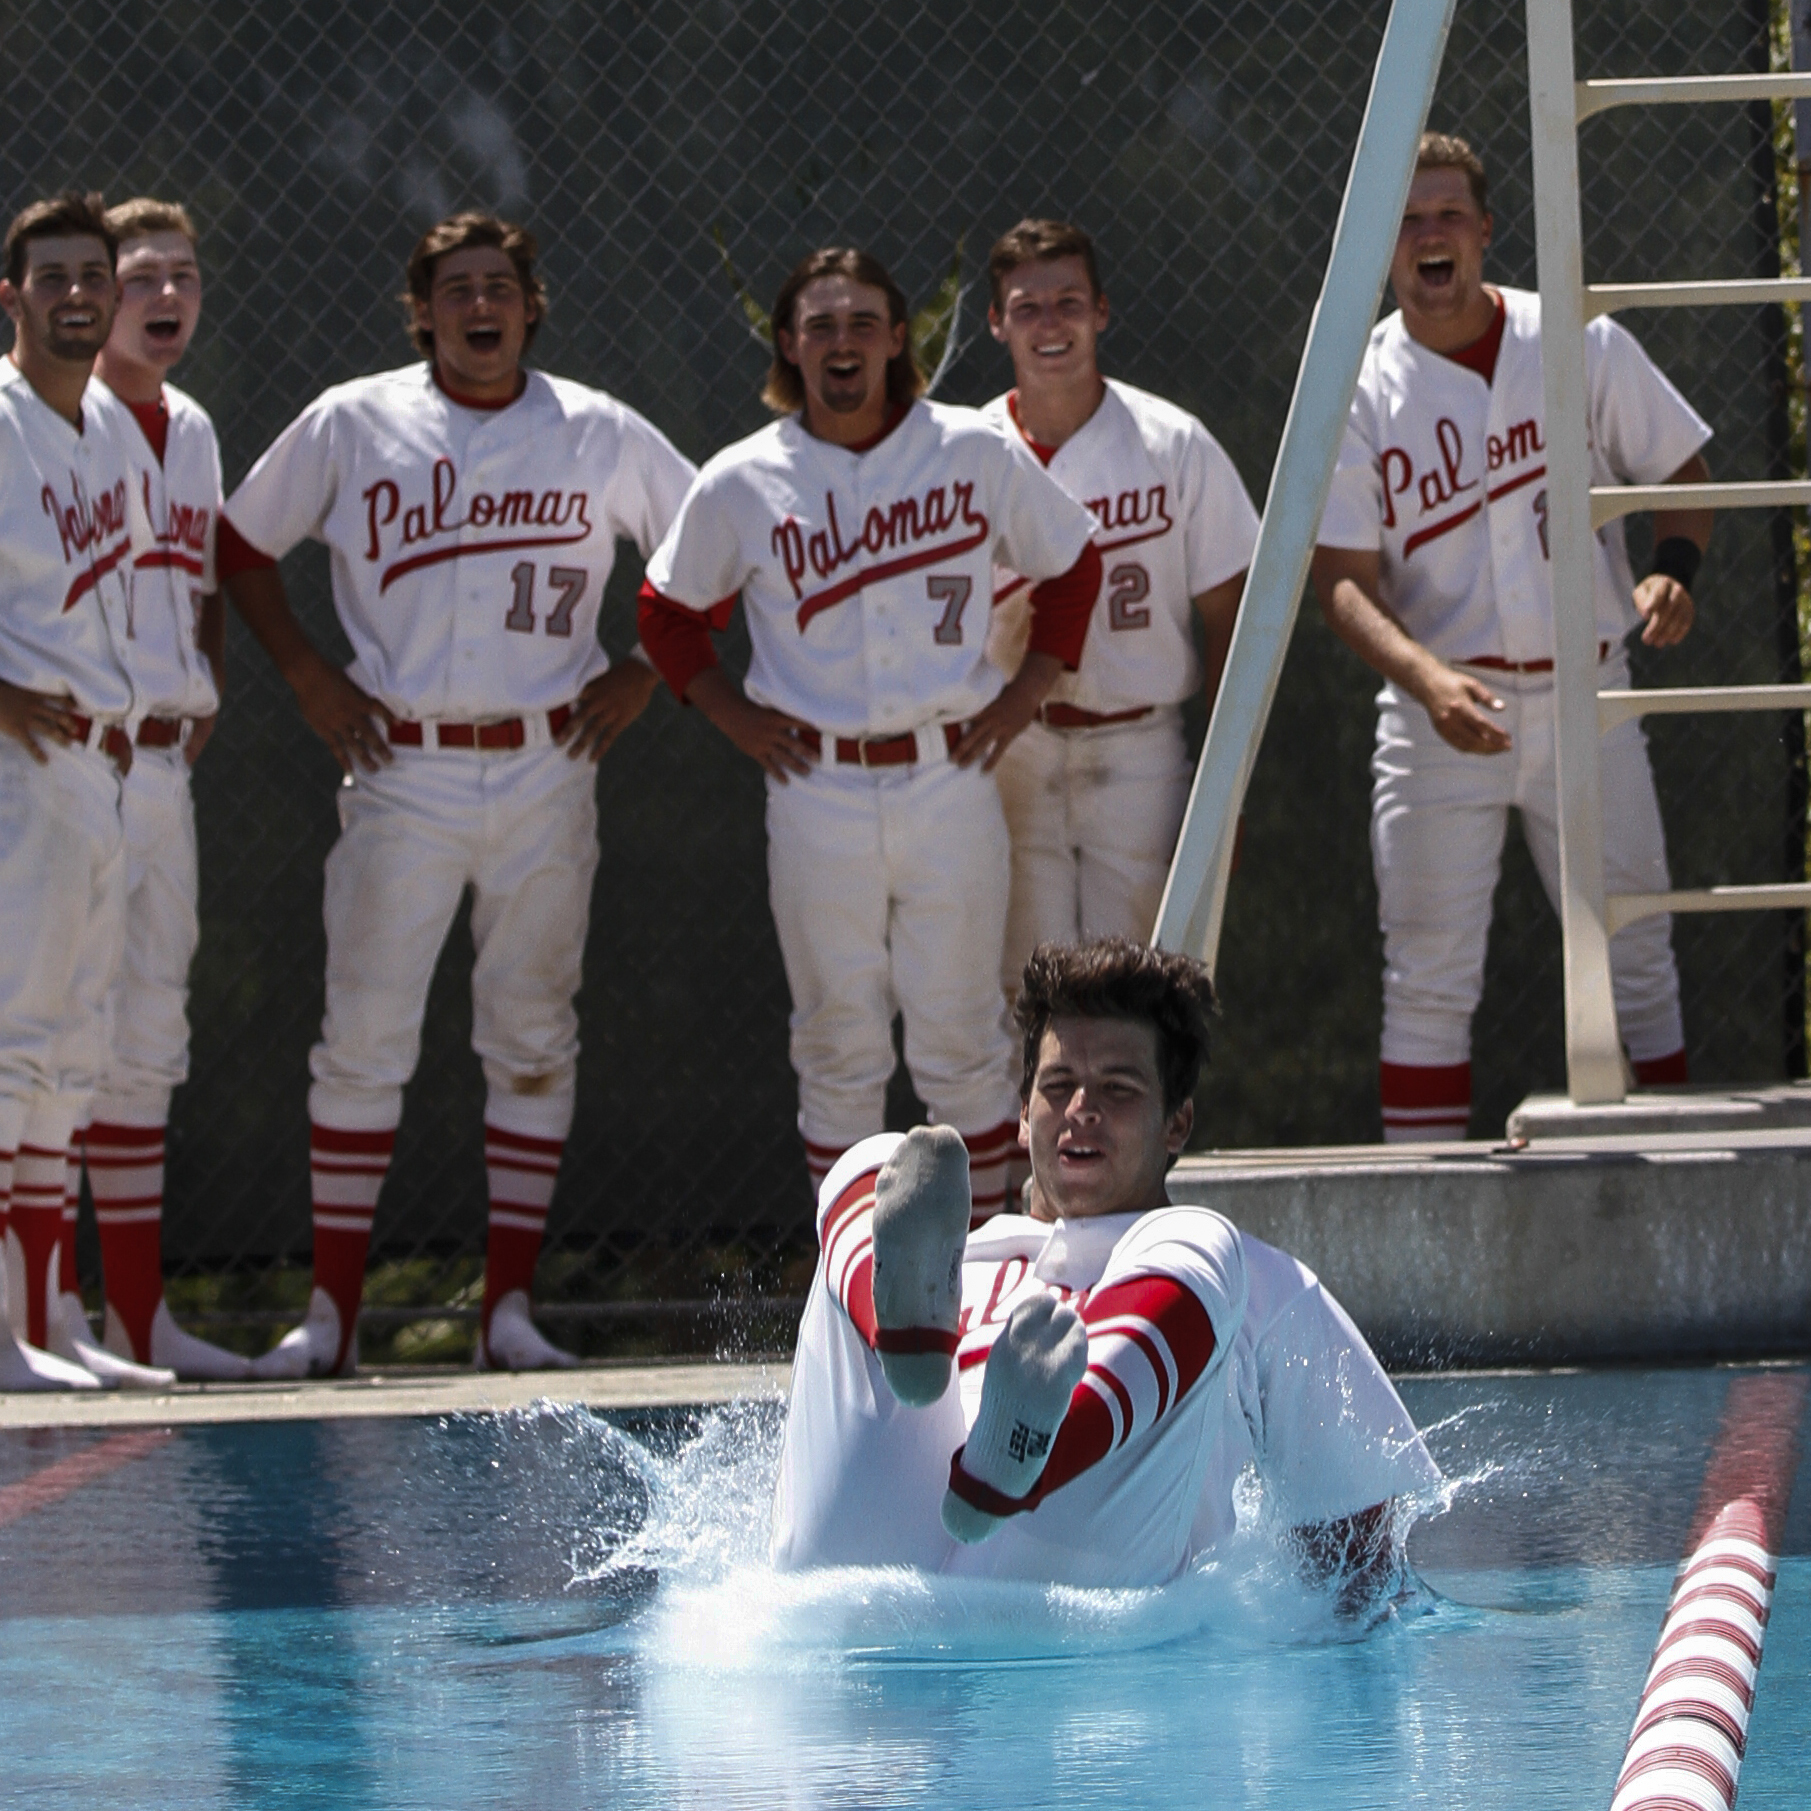 Palomar’s Ryan Lemus takes the plunge in the Wallace Memorial Pool after the Comets swept visiting Riverside Community College on Saturday, May 2, 2015 and advanced to the next round of the Southern California playoff. (Philip Farry/The Telescope)